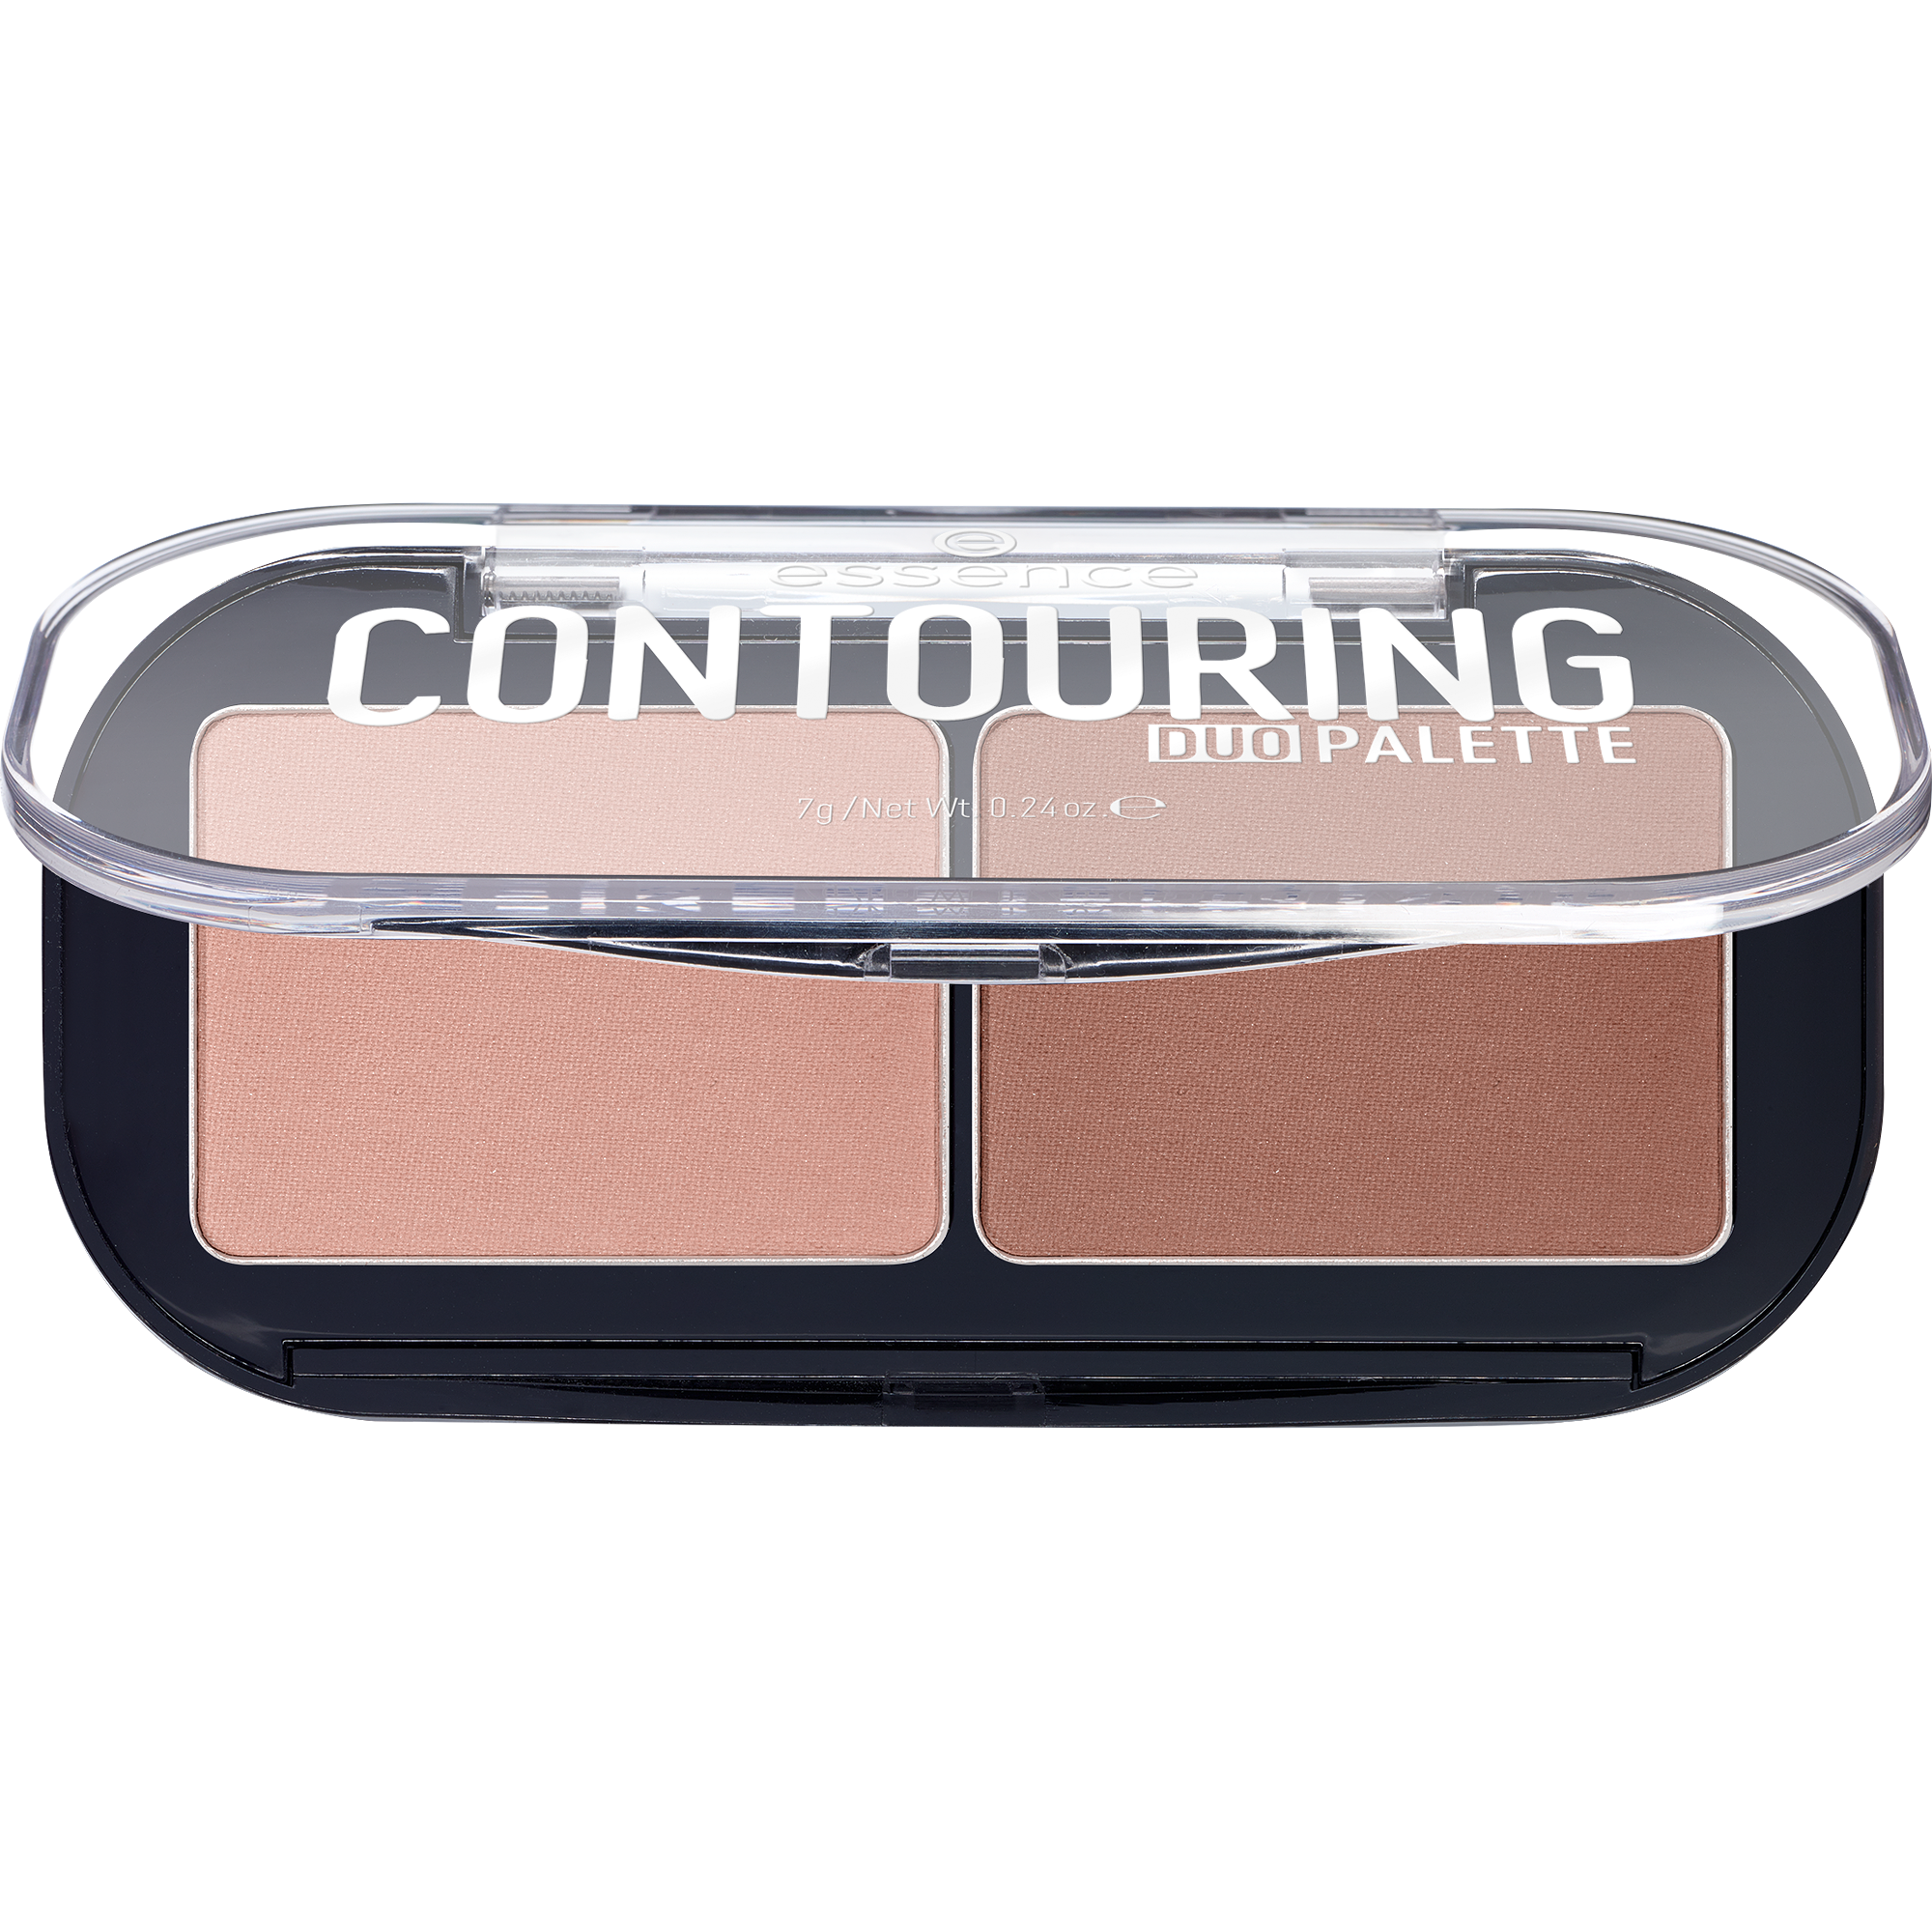 contouring duo παλέτα contouring